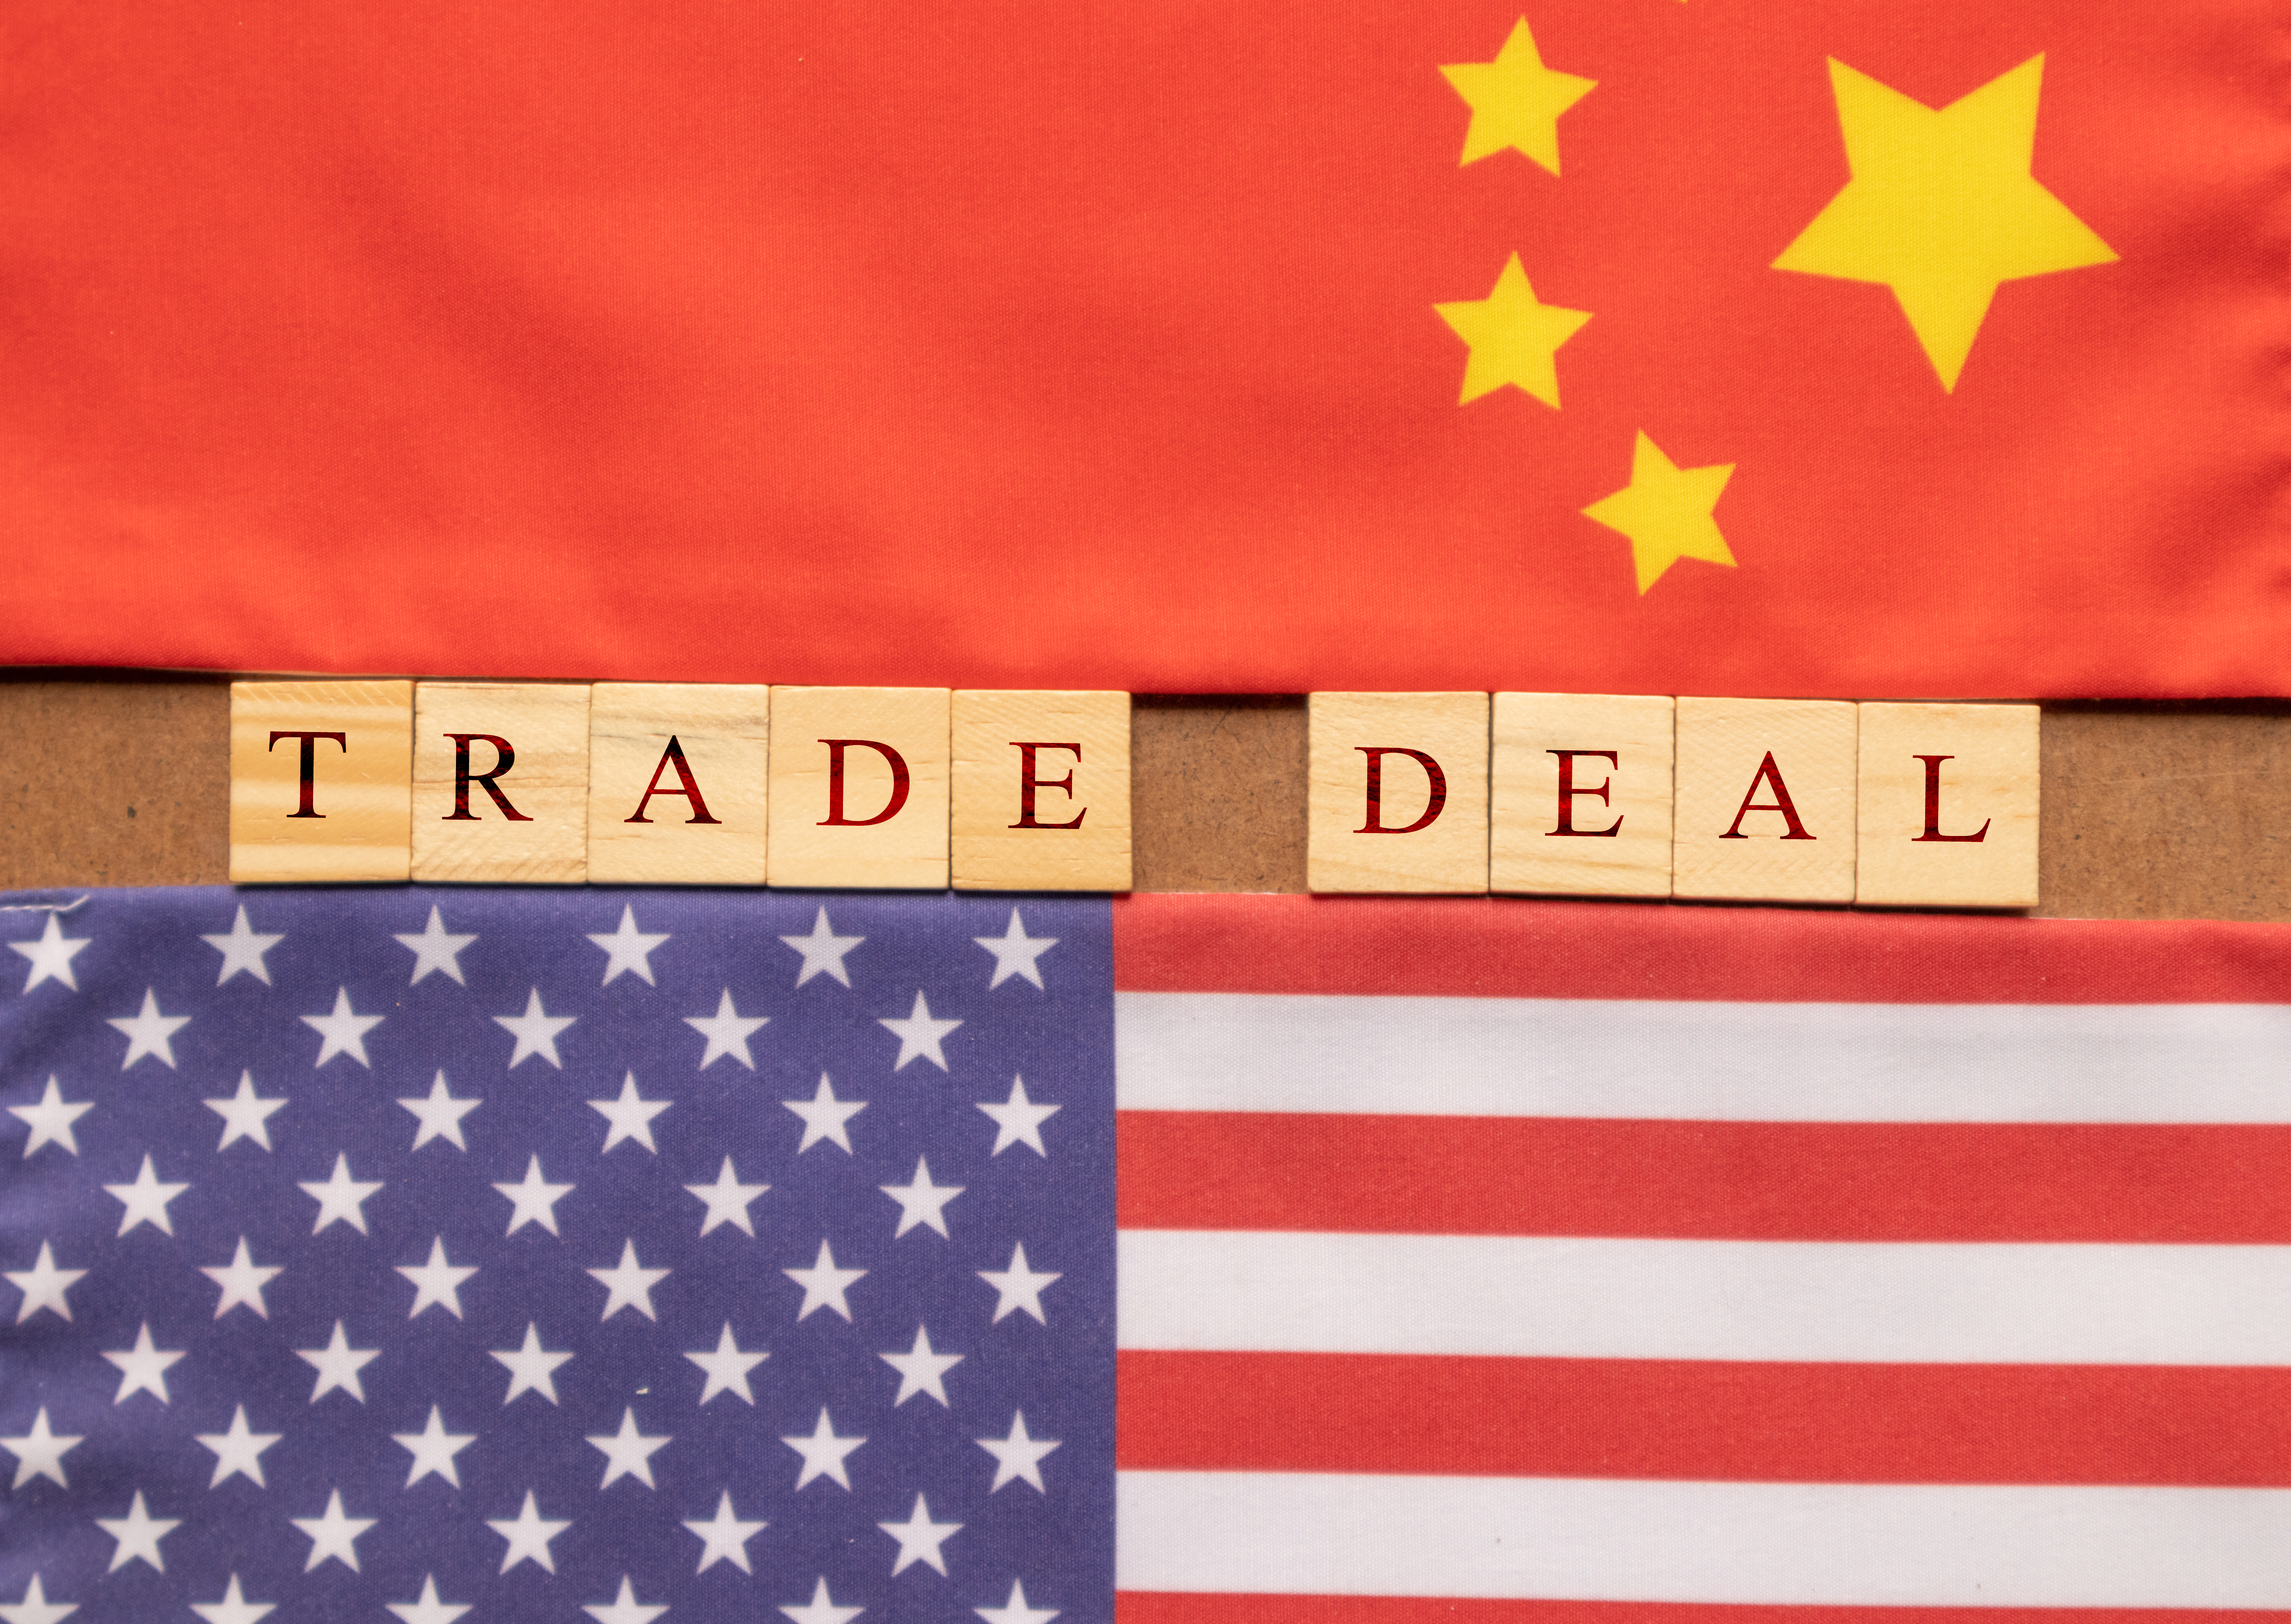 image of chinese and US flags with scrabble tiles spelling out trade deal 